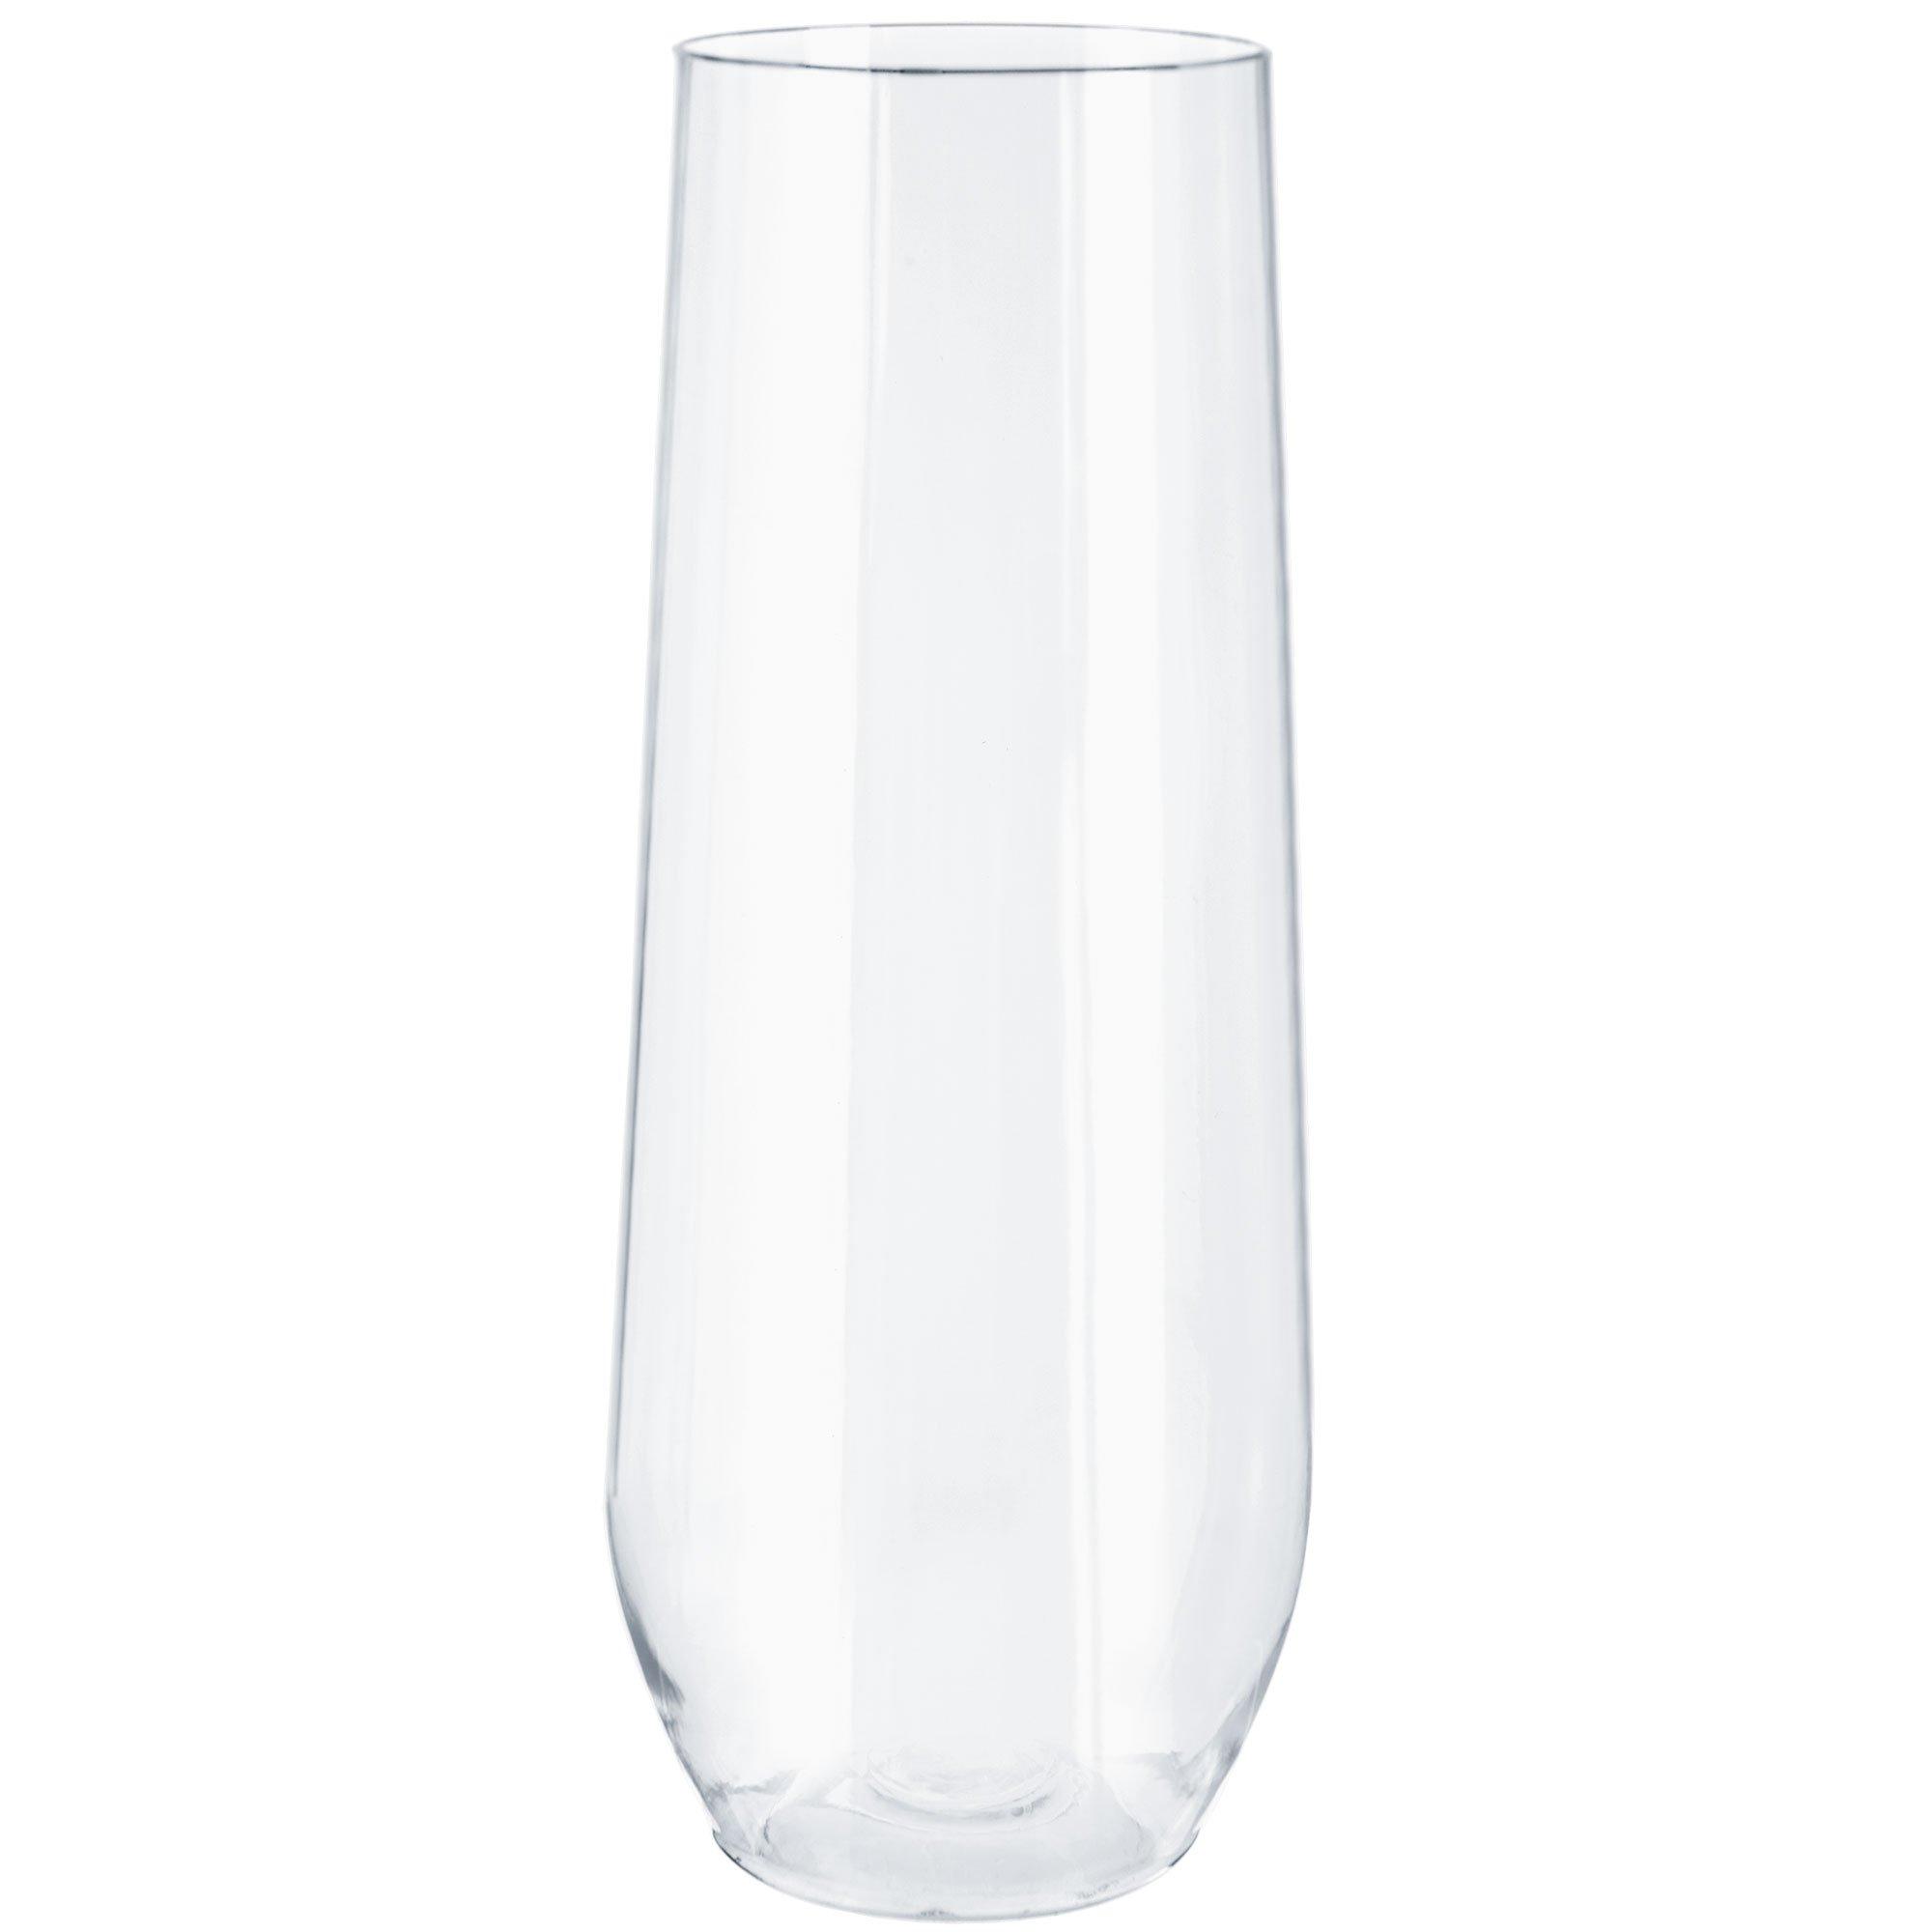 Decorline White Plastic Champagne Cups - 6 oz. (Pack of 8) - Premium Party Flutes for Gatherings, Events, and Celebrations